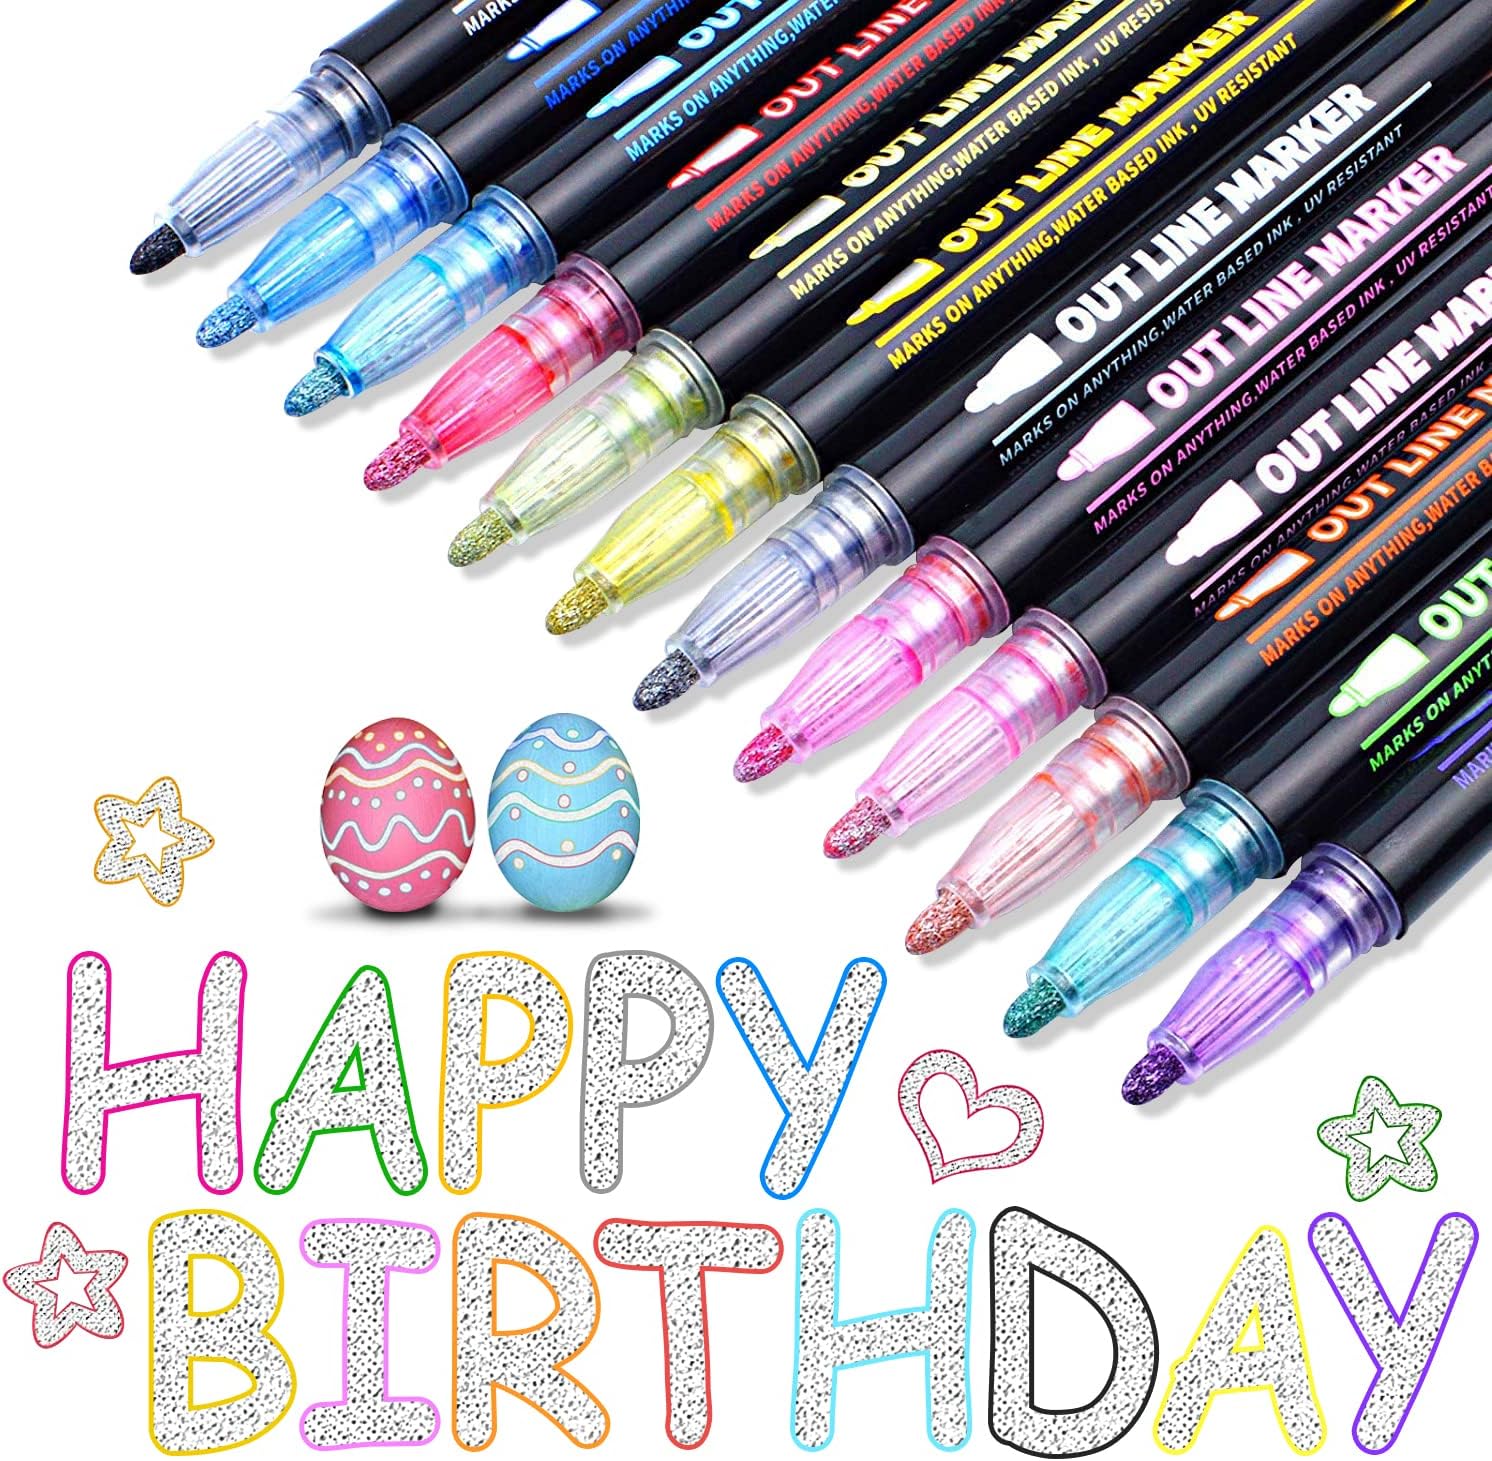 Maqhpu Glitter Pens Outline Pens, Stocking Fillers Kids Girls, Gifts for Teenage Girls, 12 Colours Metallic Double Line Outline Marker Pens for Scrapbook, Christmas Gifts for 4-12 Year Old Girls